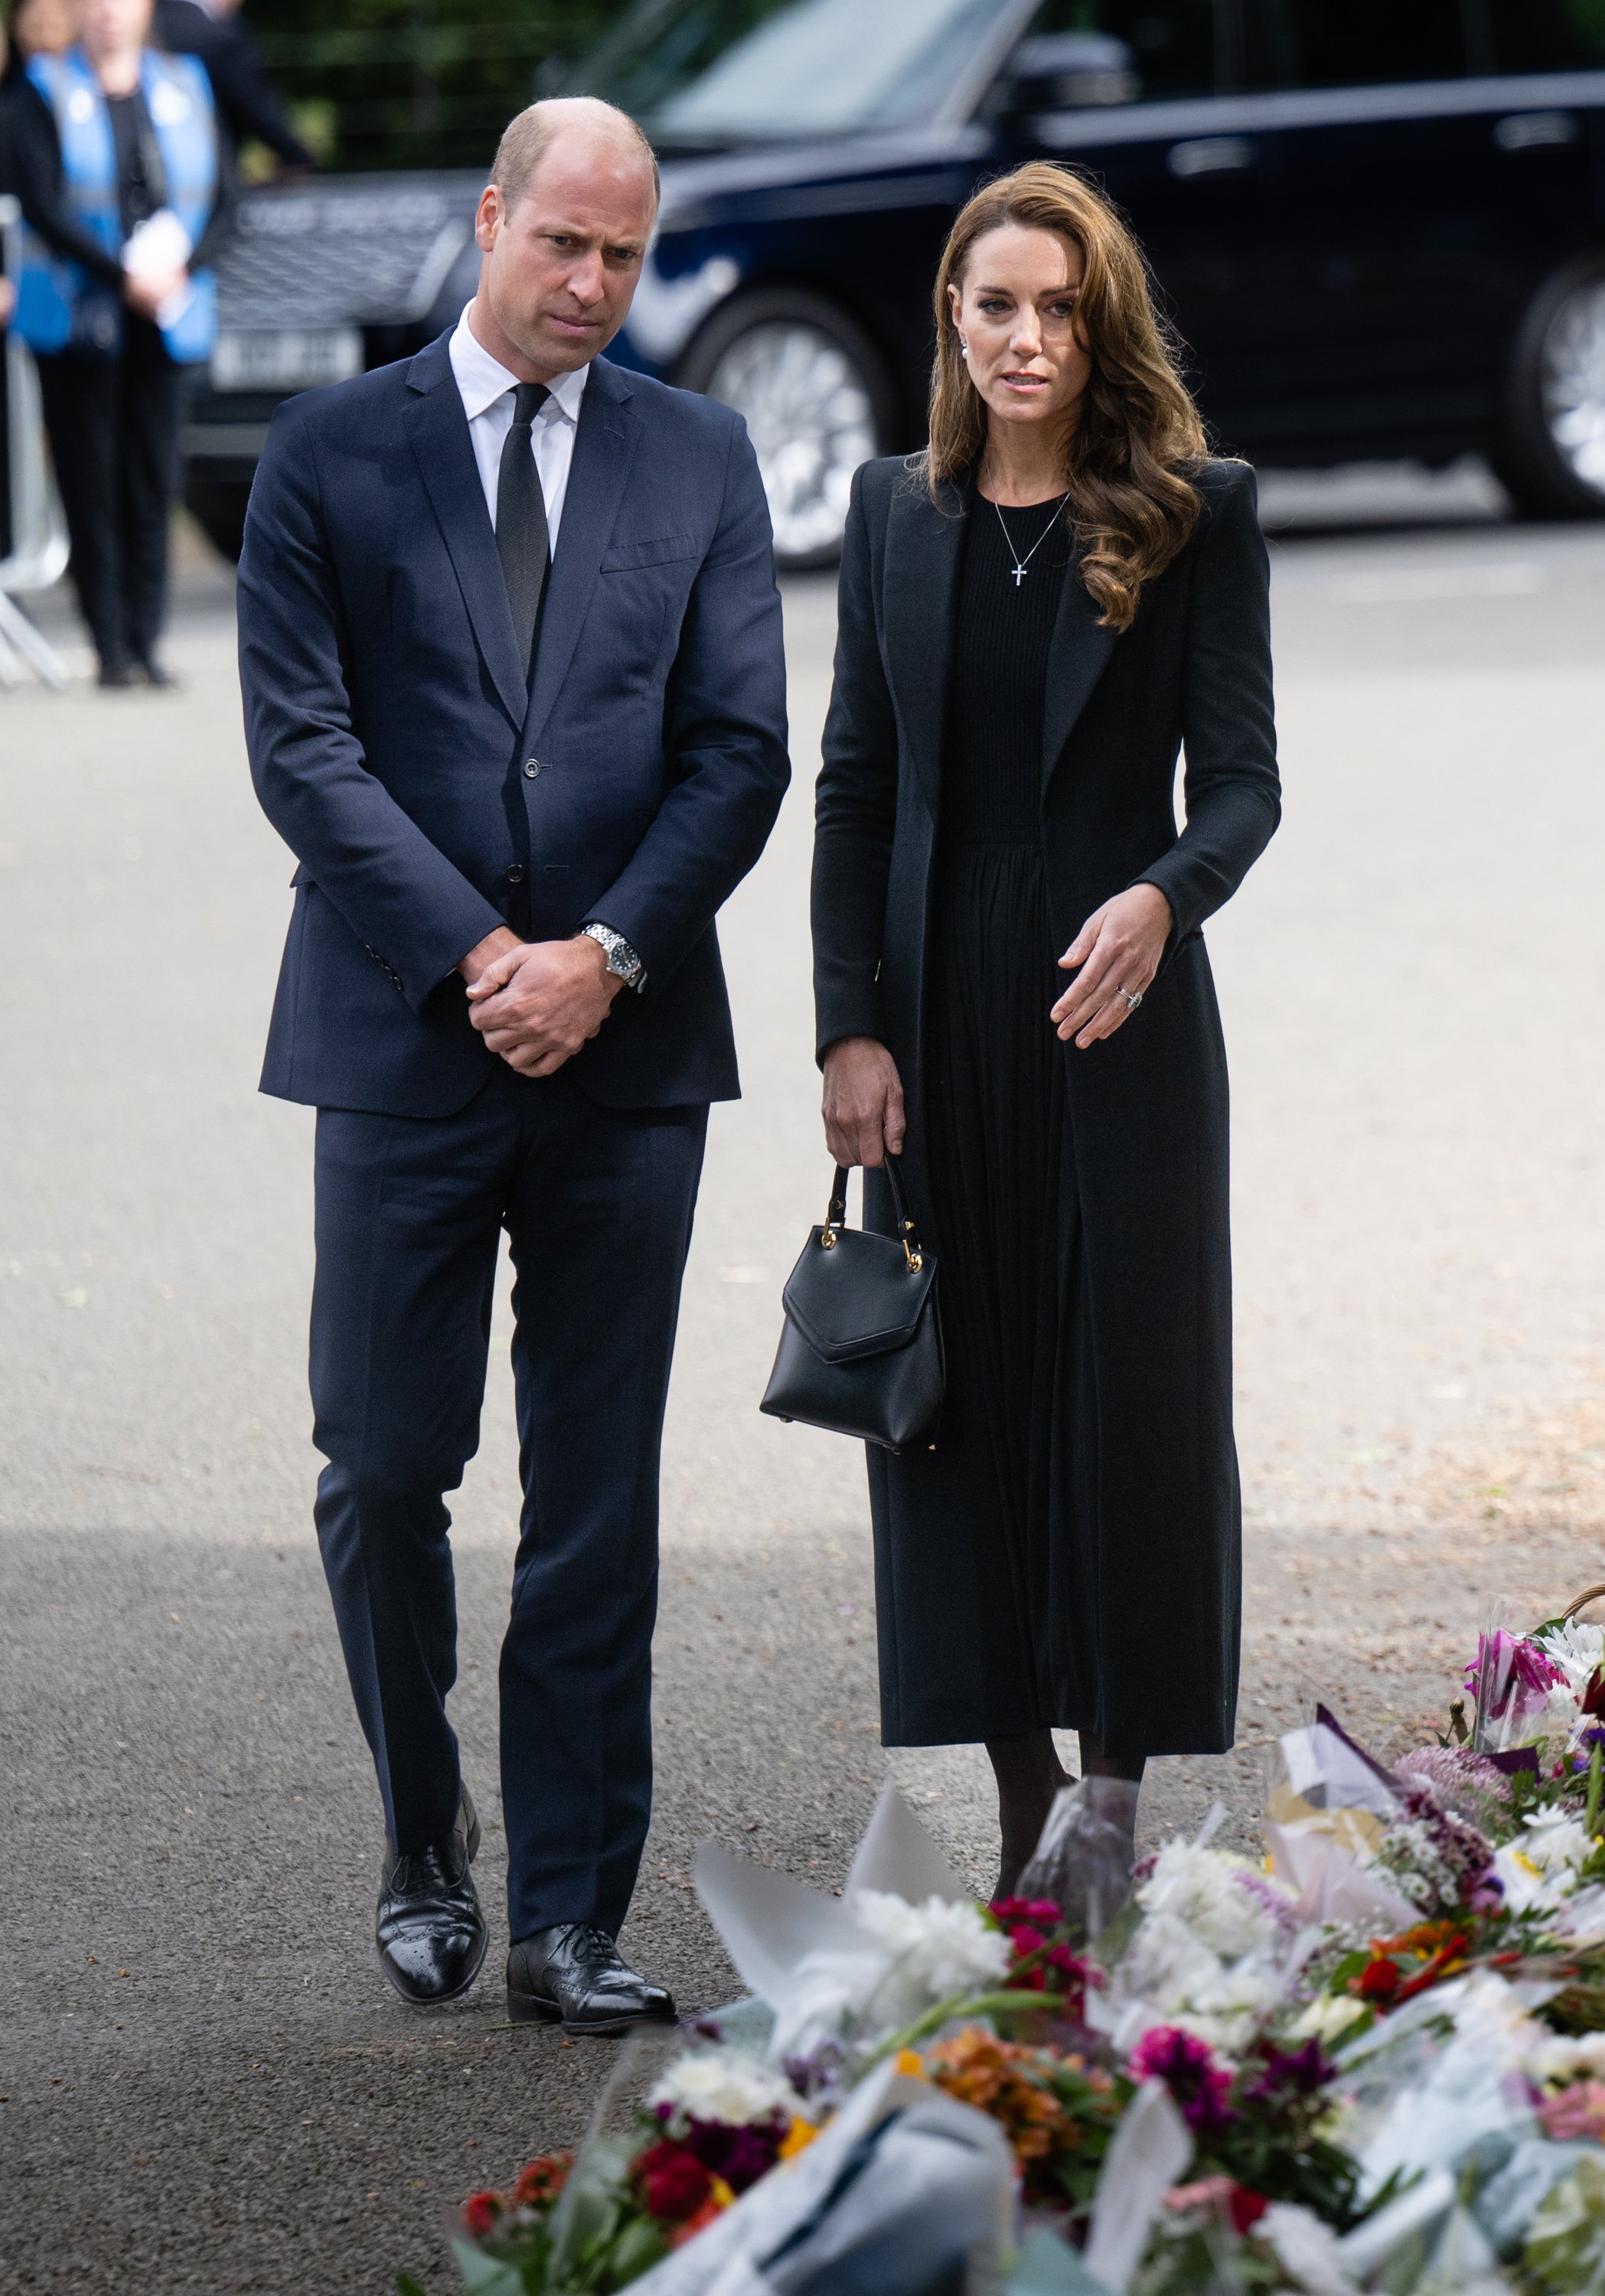 Prince William, Prince of Wales and Catherine, Princess of Wales view floral tributes at Sandringham on September 15, 2022 in King's Lynn, England | Source: Getty Images